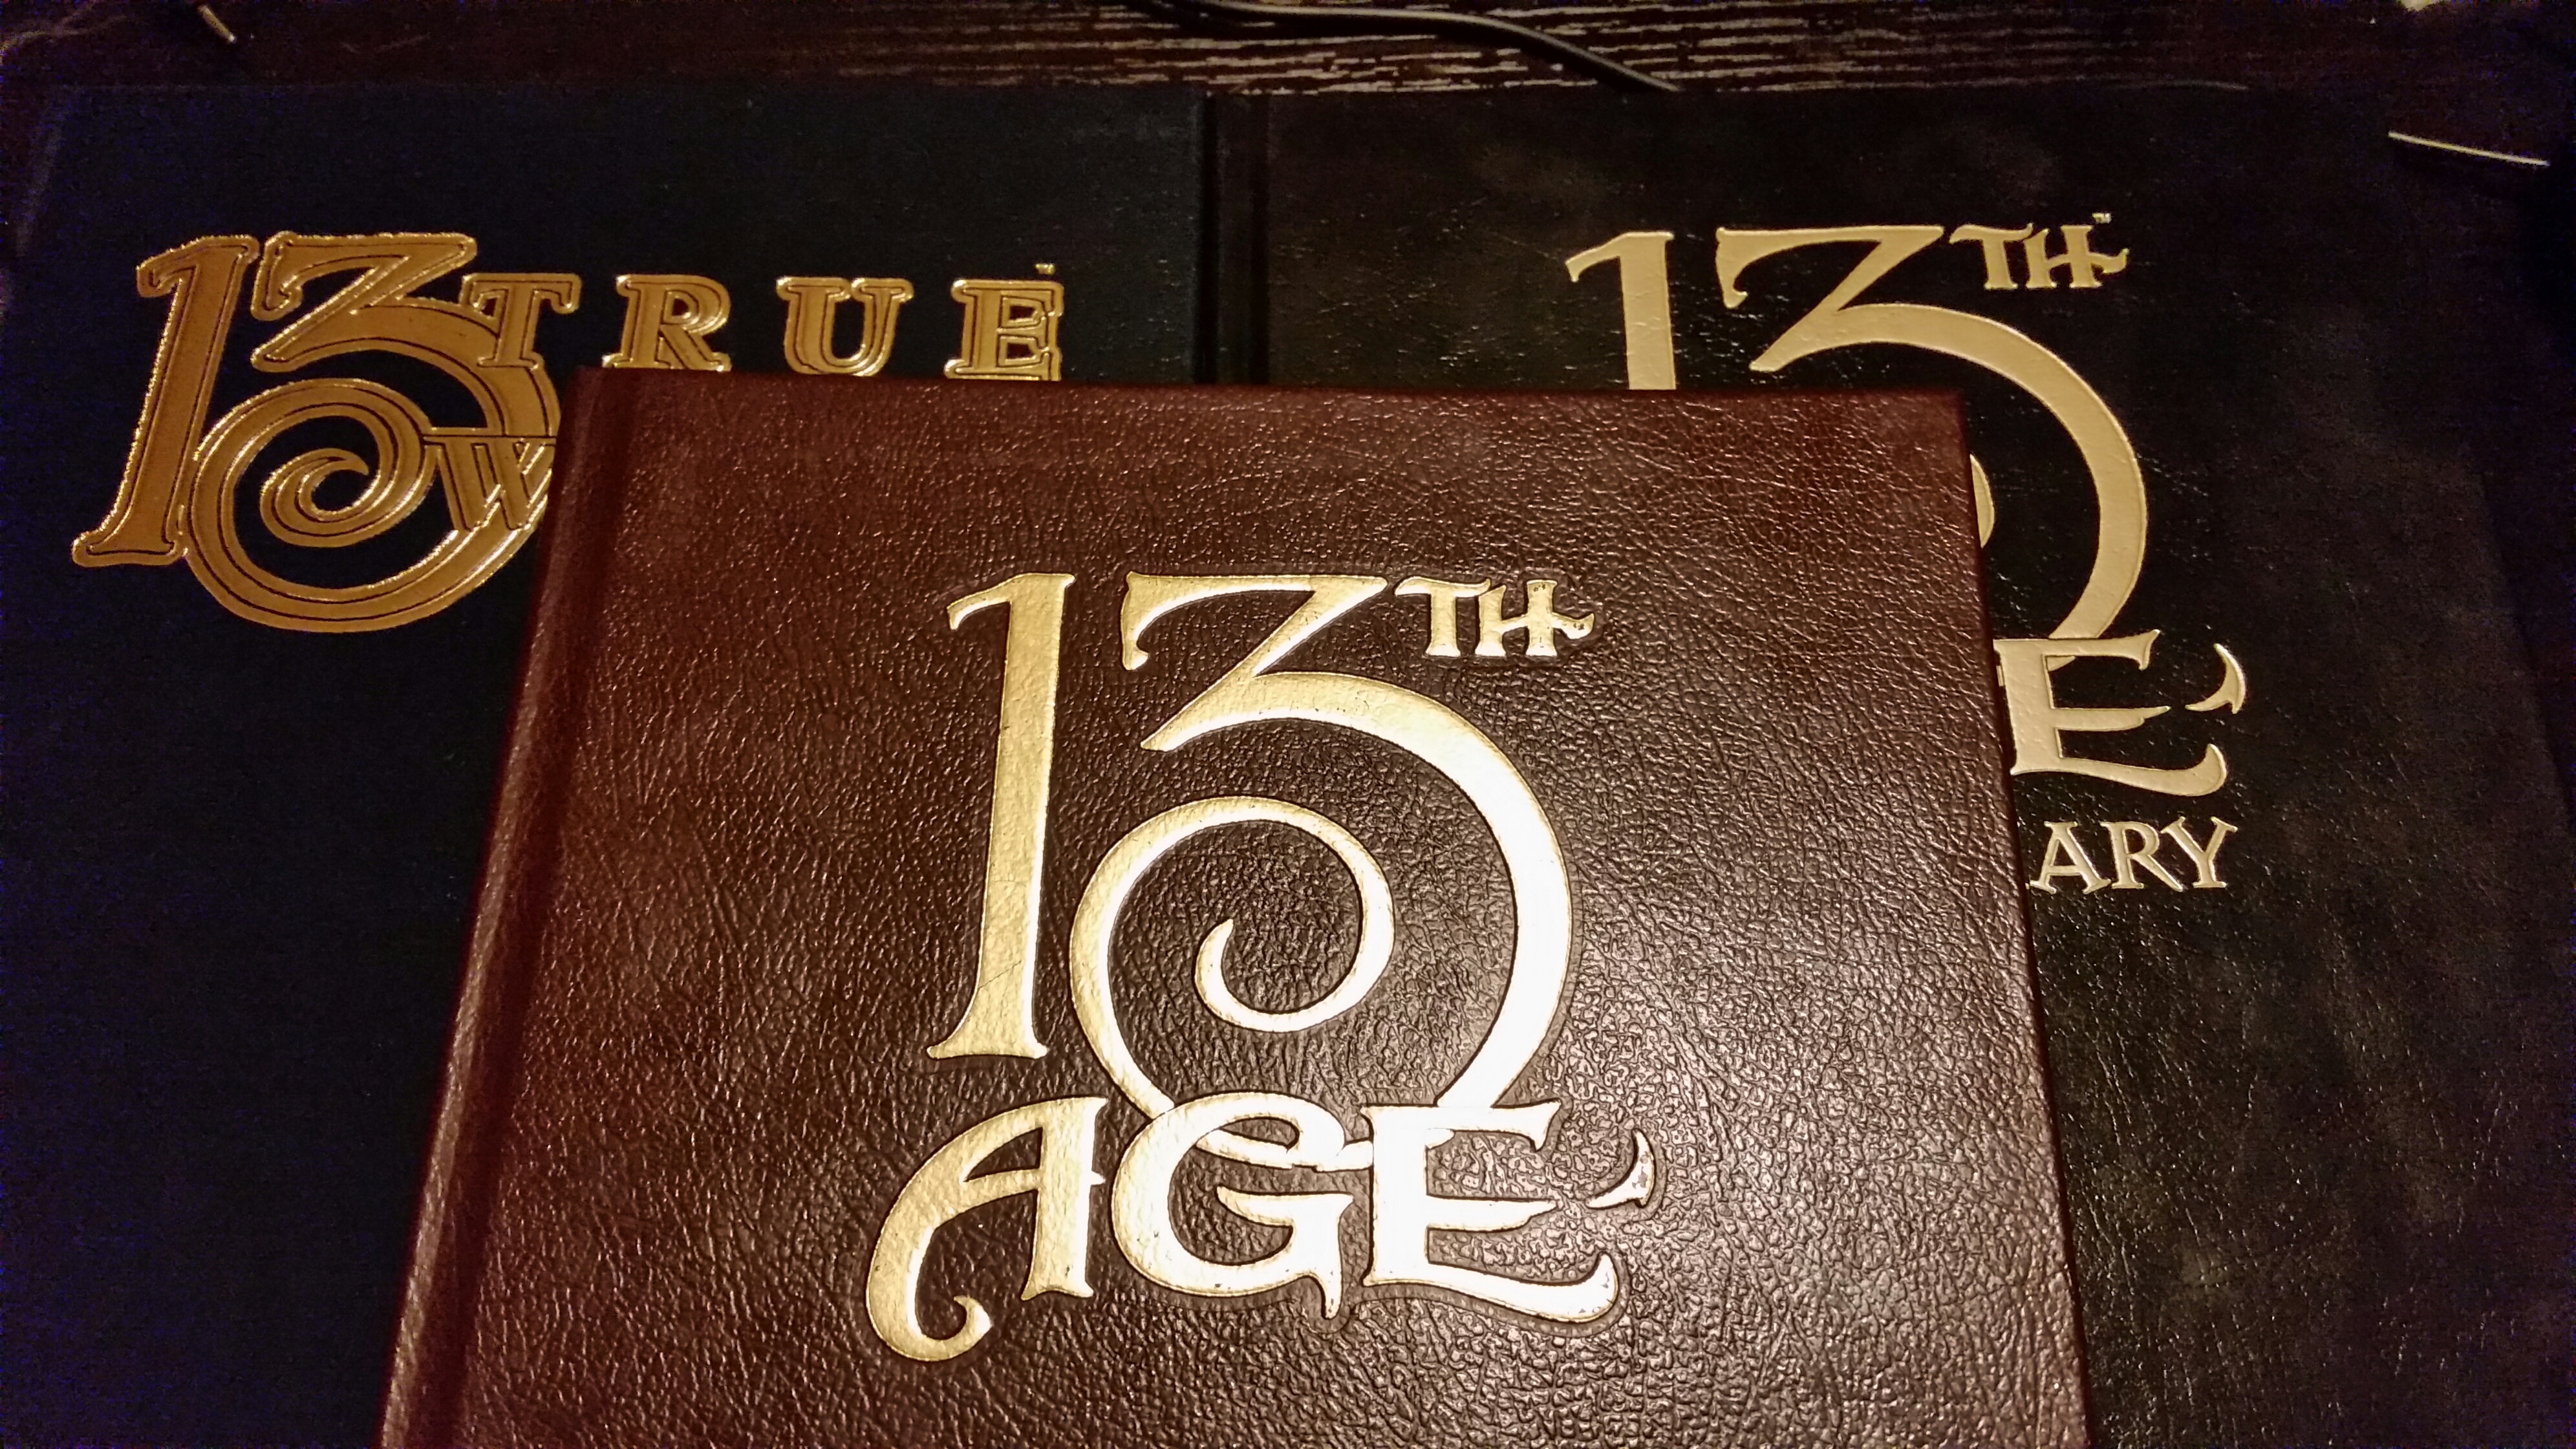 The Holy Trinity of 13th Age limited edition books